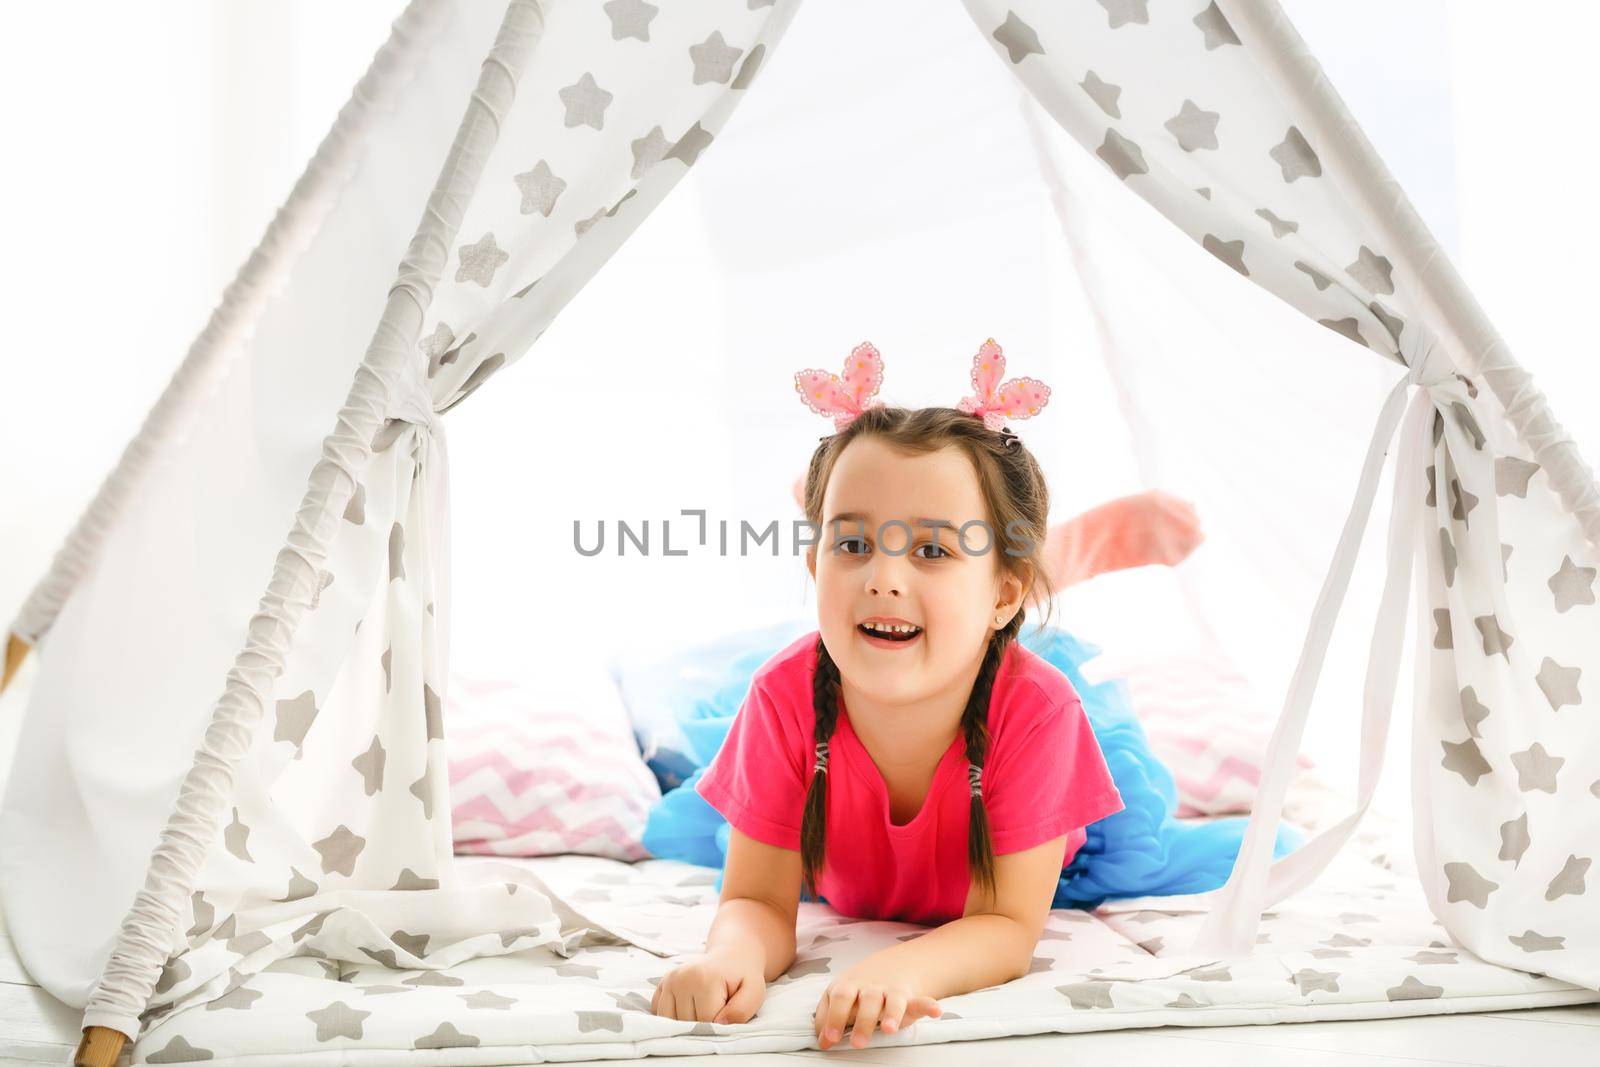 A little girl sits in a wigwam with pillows